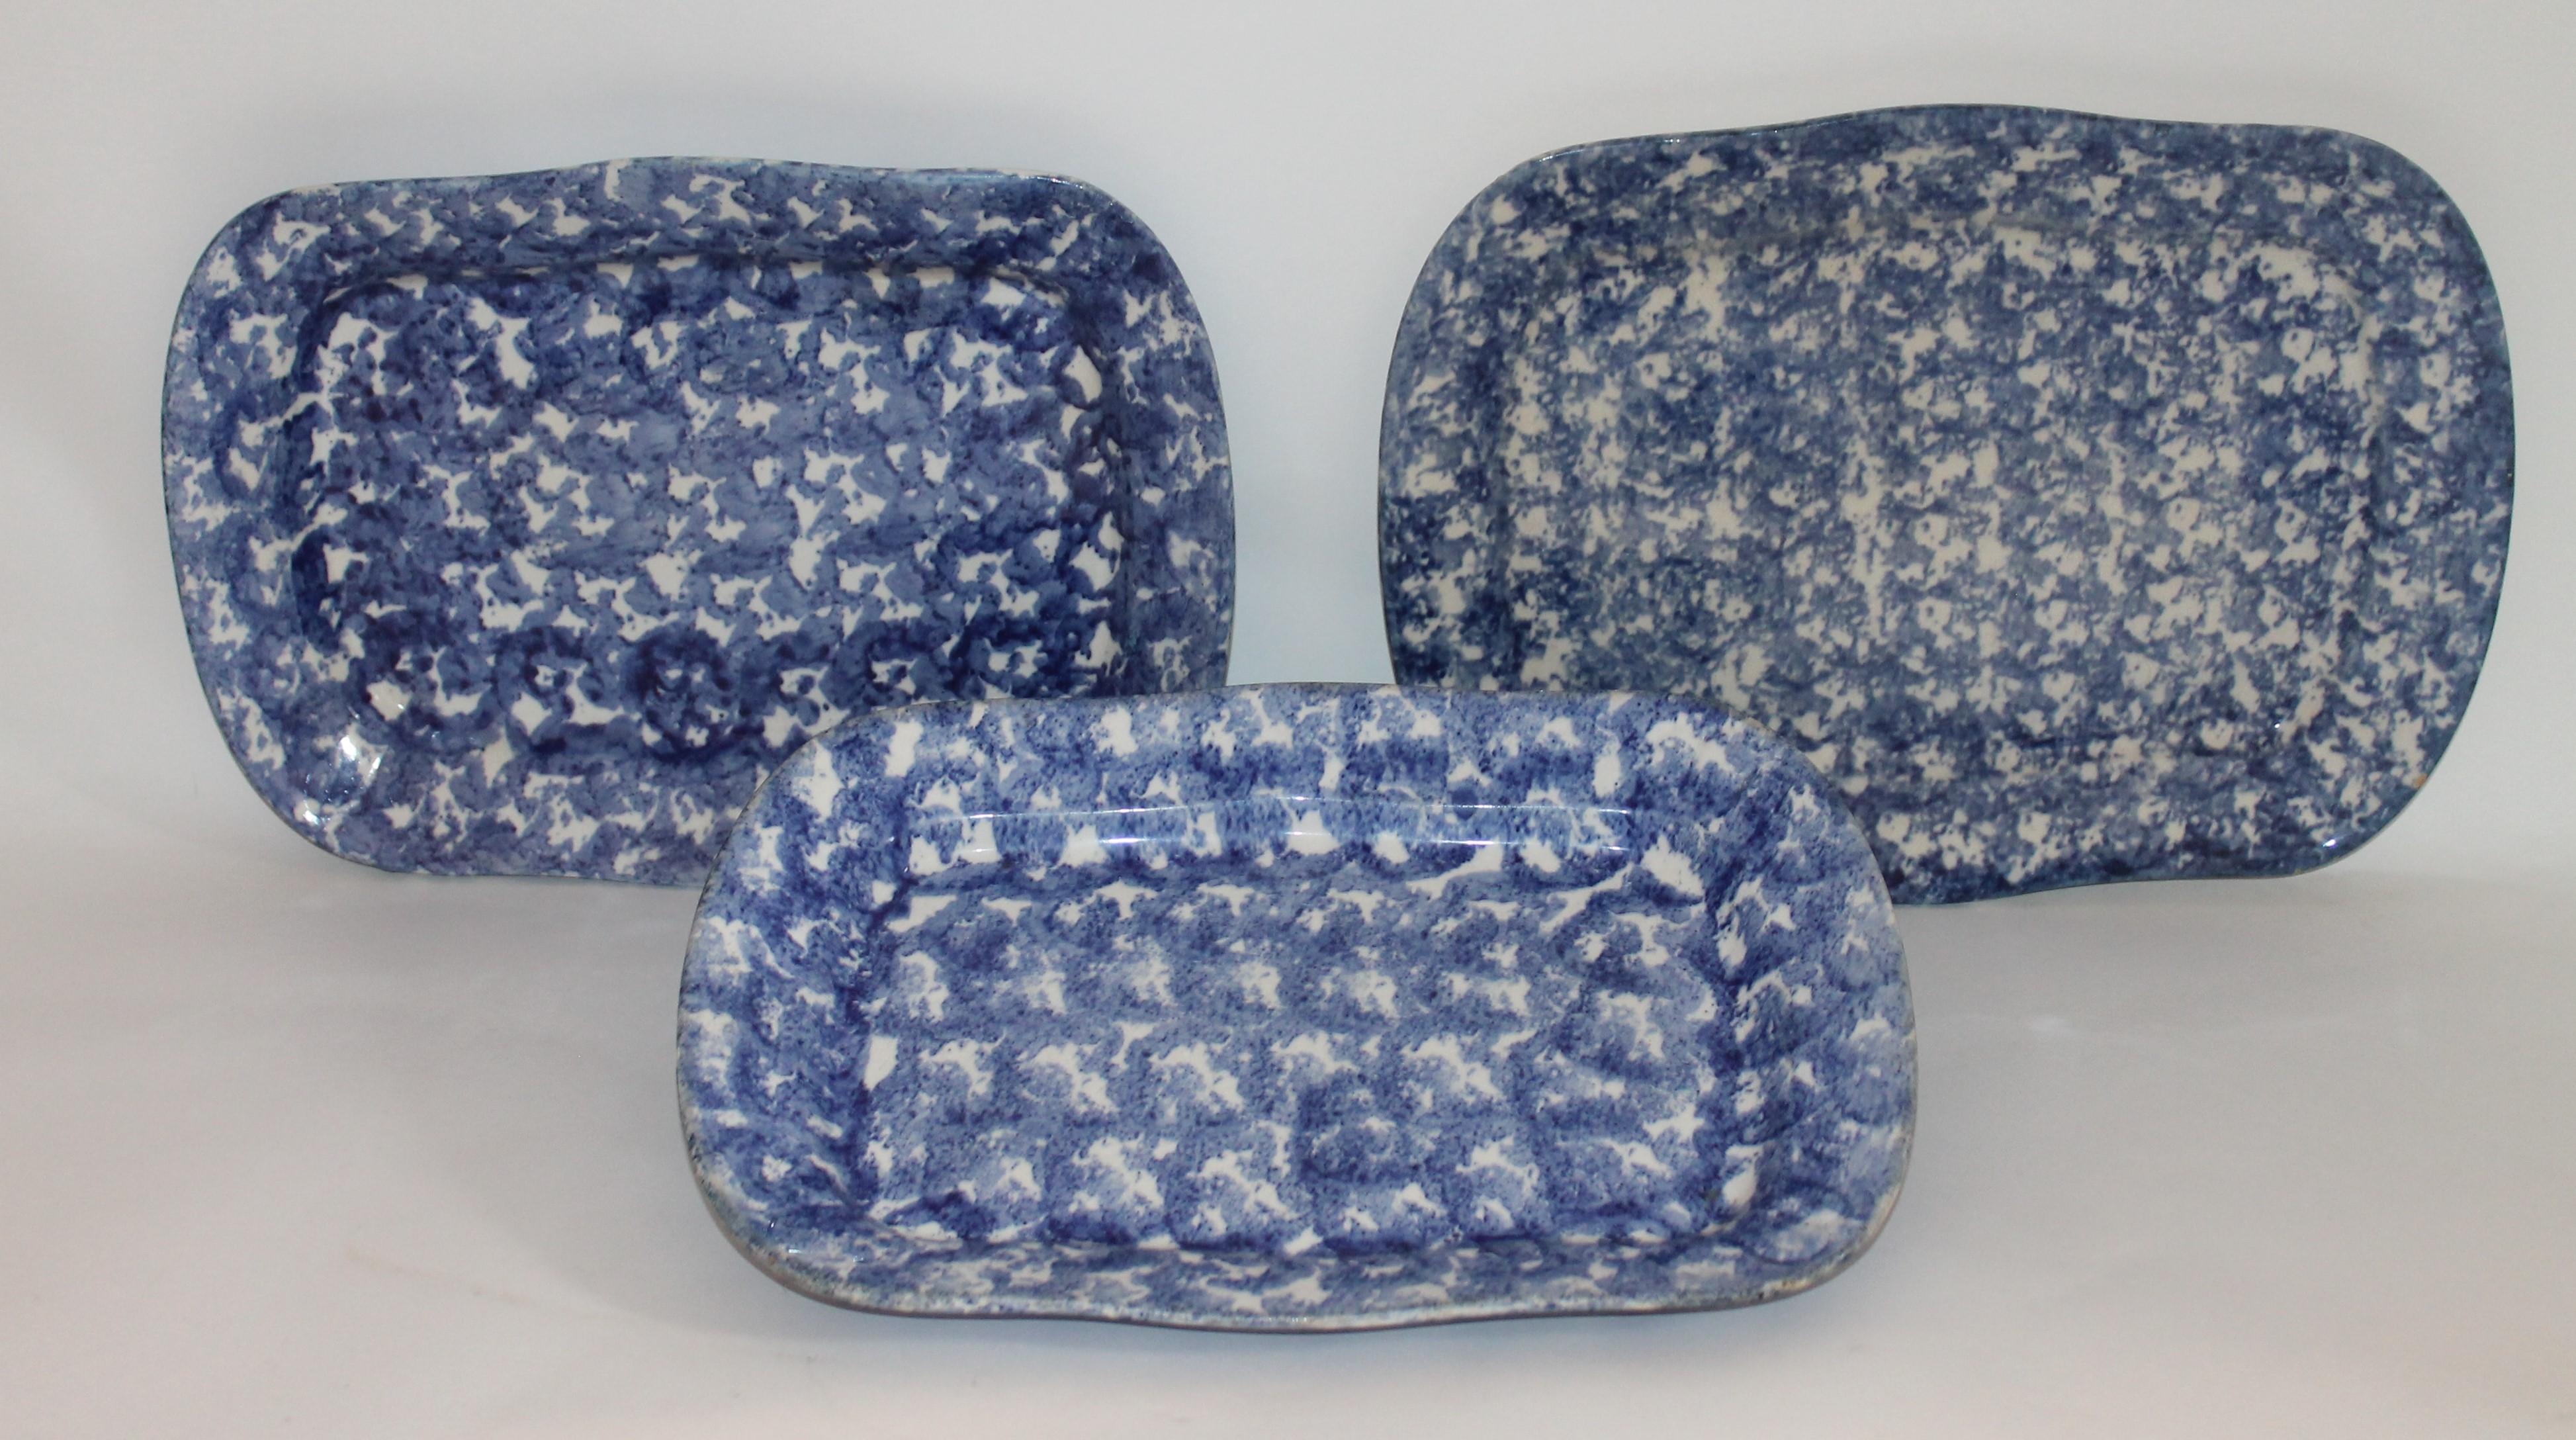 Hand-Crafted 19th Century Sponge Ware Platters, Collection of Four For Sale